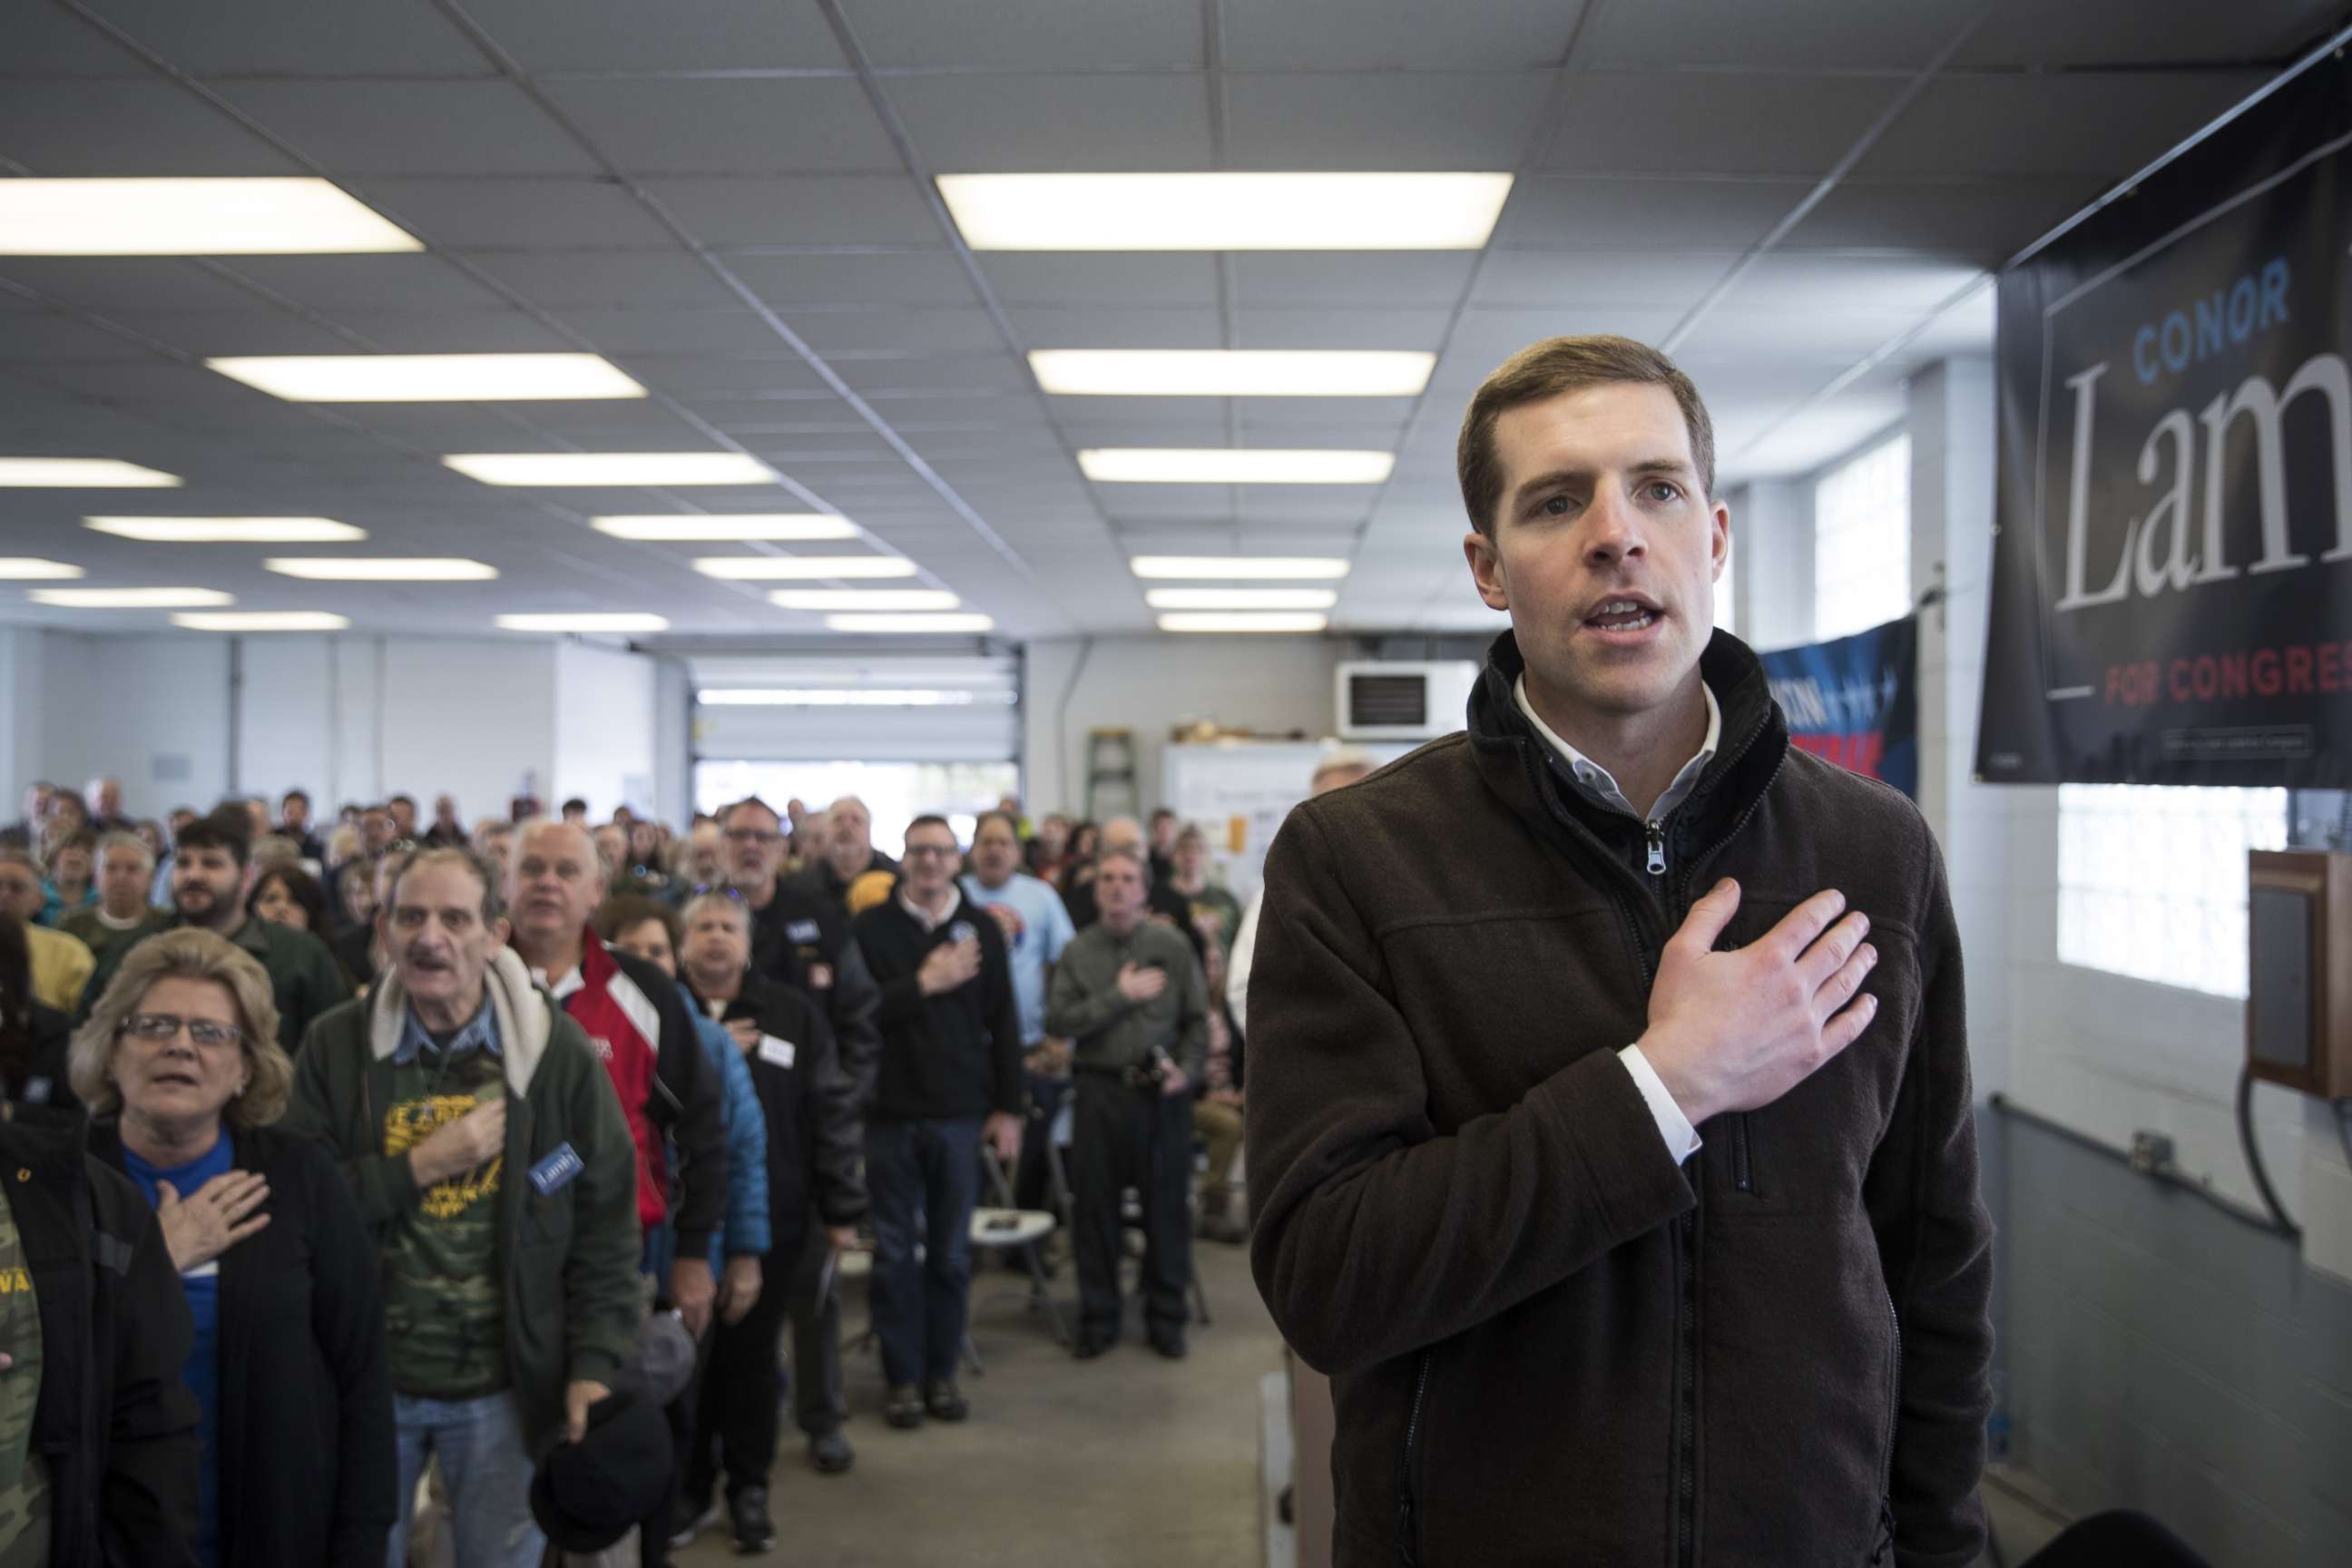 PHOTO: Conor Lamb, Democratic Congressional candidate for Pennsylvania's 18th district, and the audience recite the Pledge of Allegiance during a campaign rally with United Mine Workers of America (UMWA), March 11, 2018, in Waynesburg, Penn.